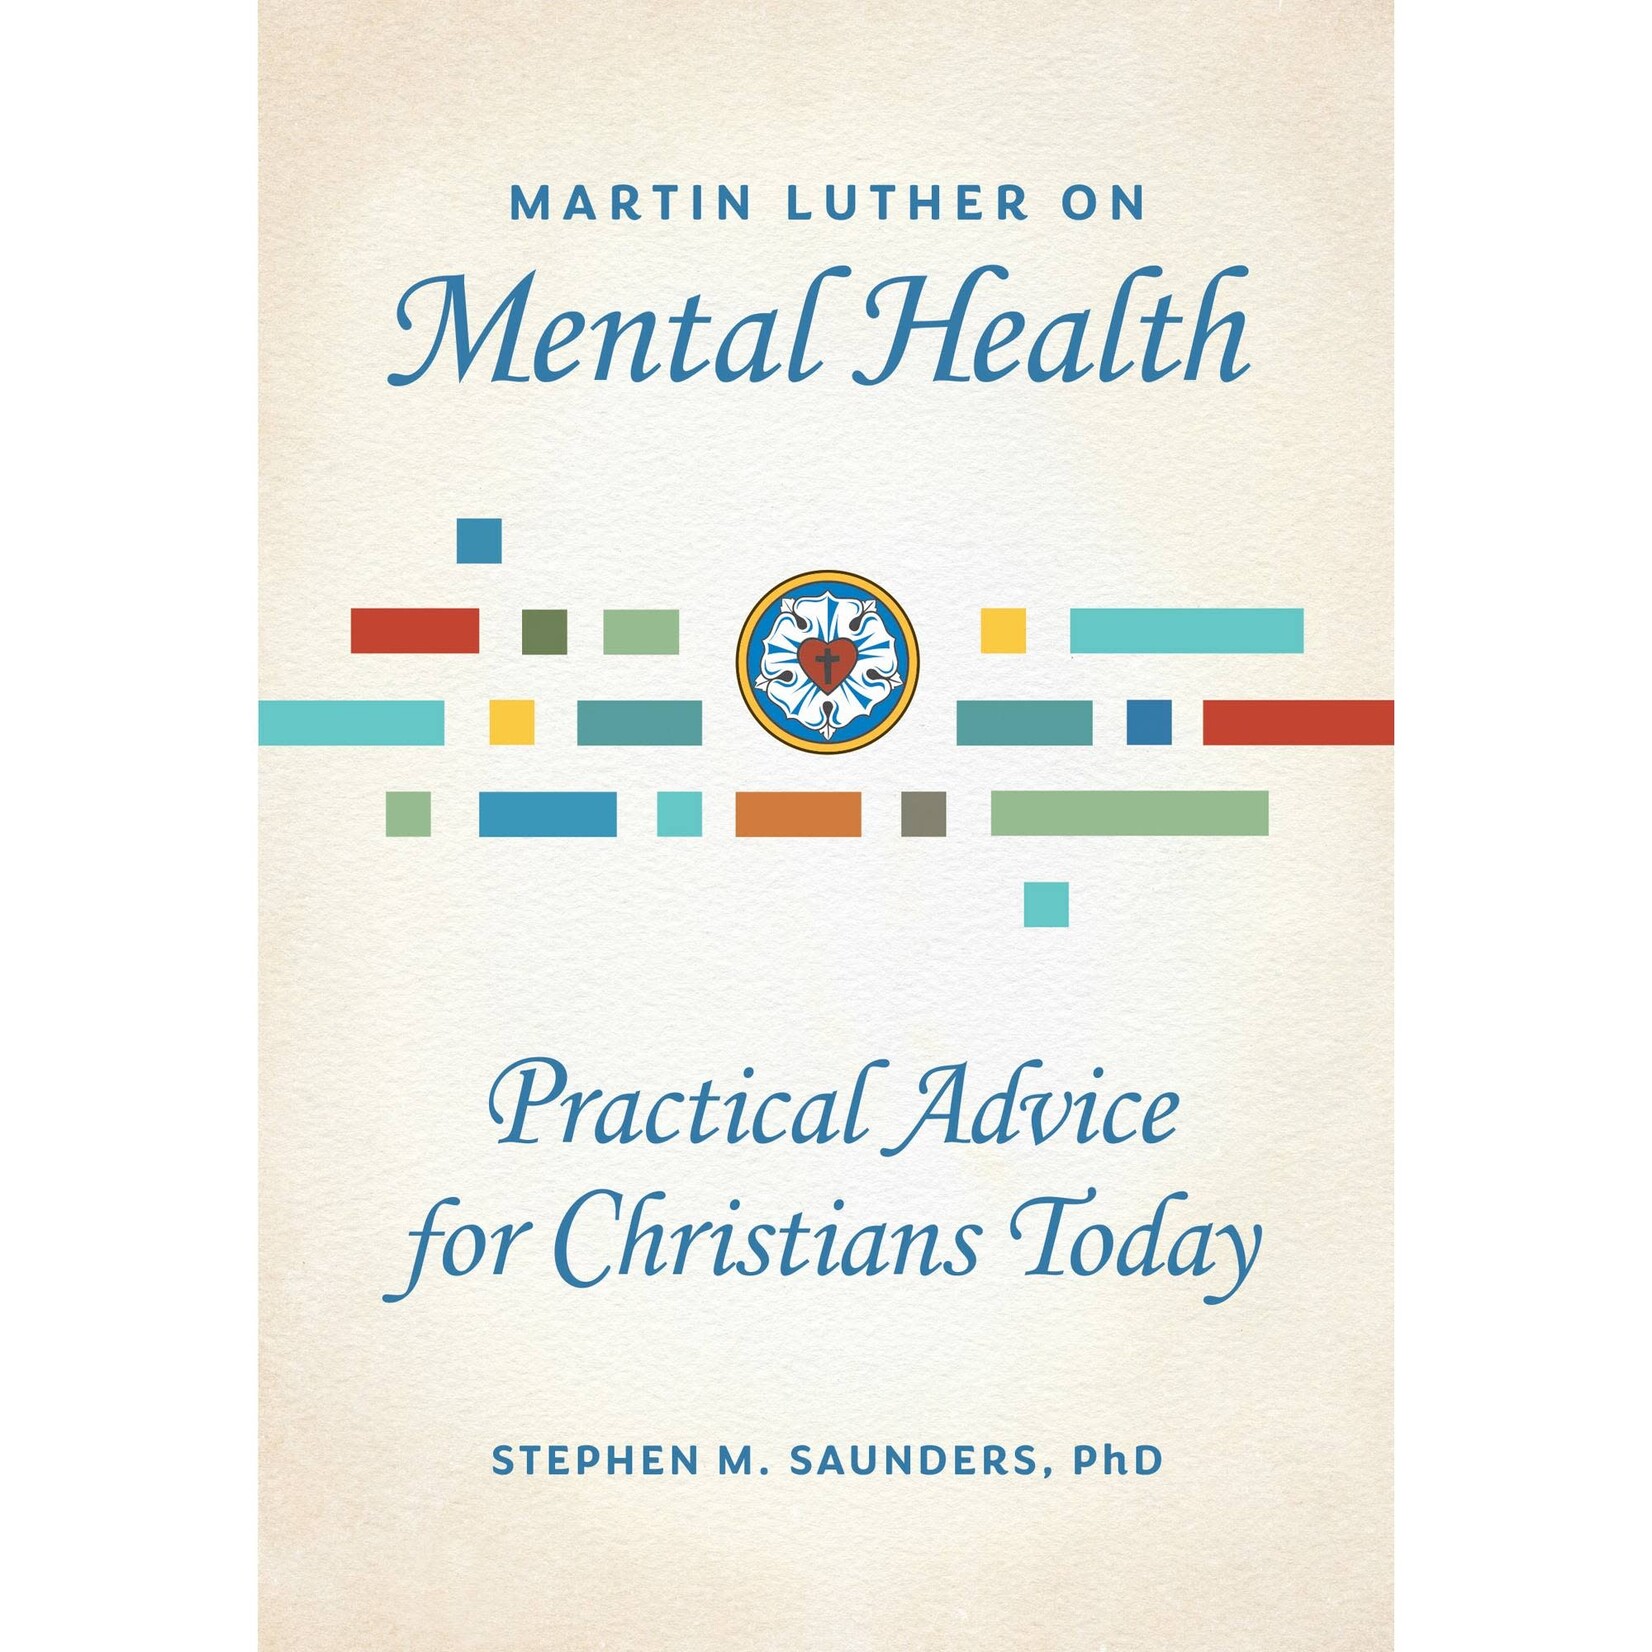 Martin Luther on Mental Health: Practical Advice for Christians Today